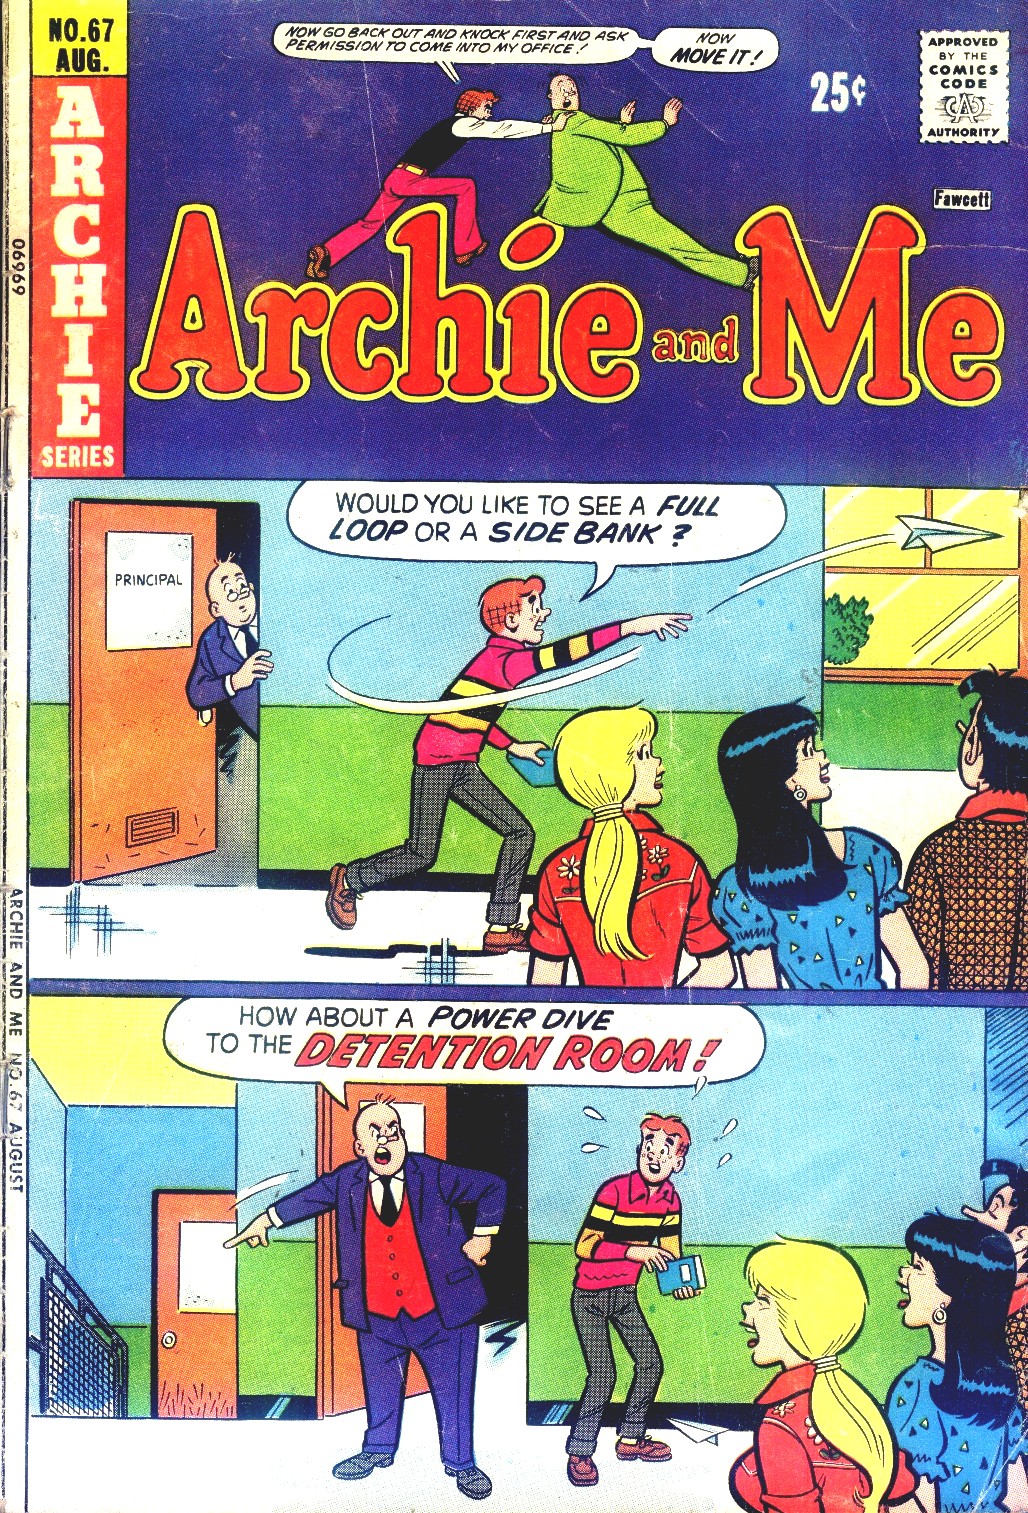 Read online Archie and Me comic -  Issue #67 - 1